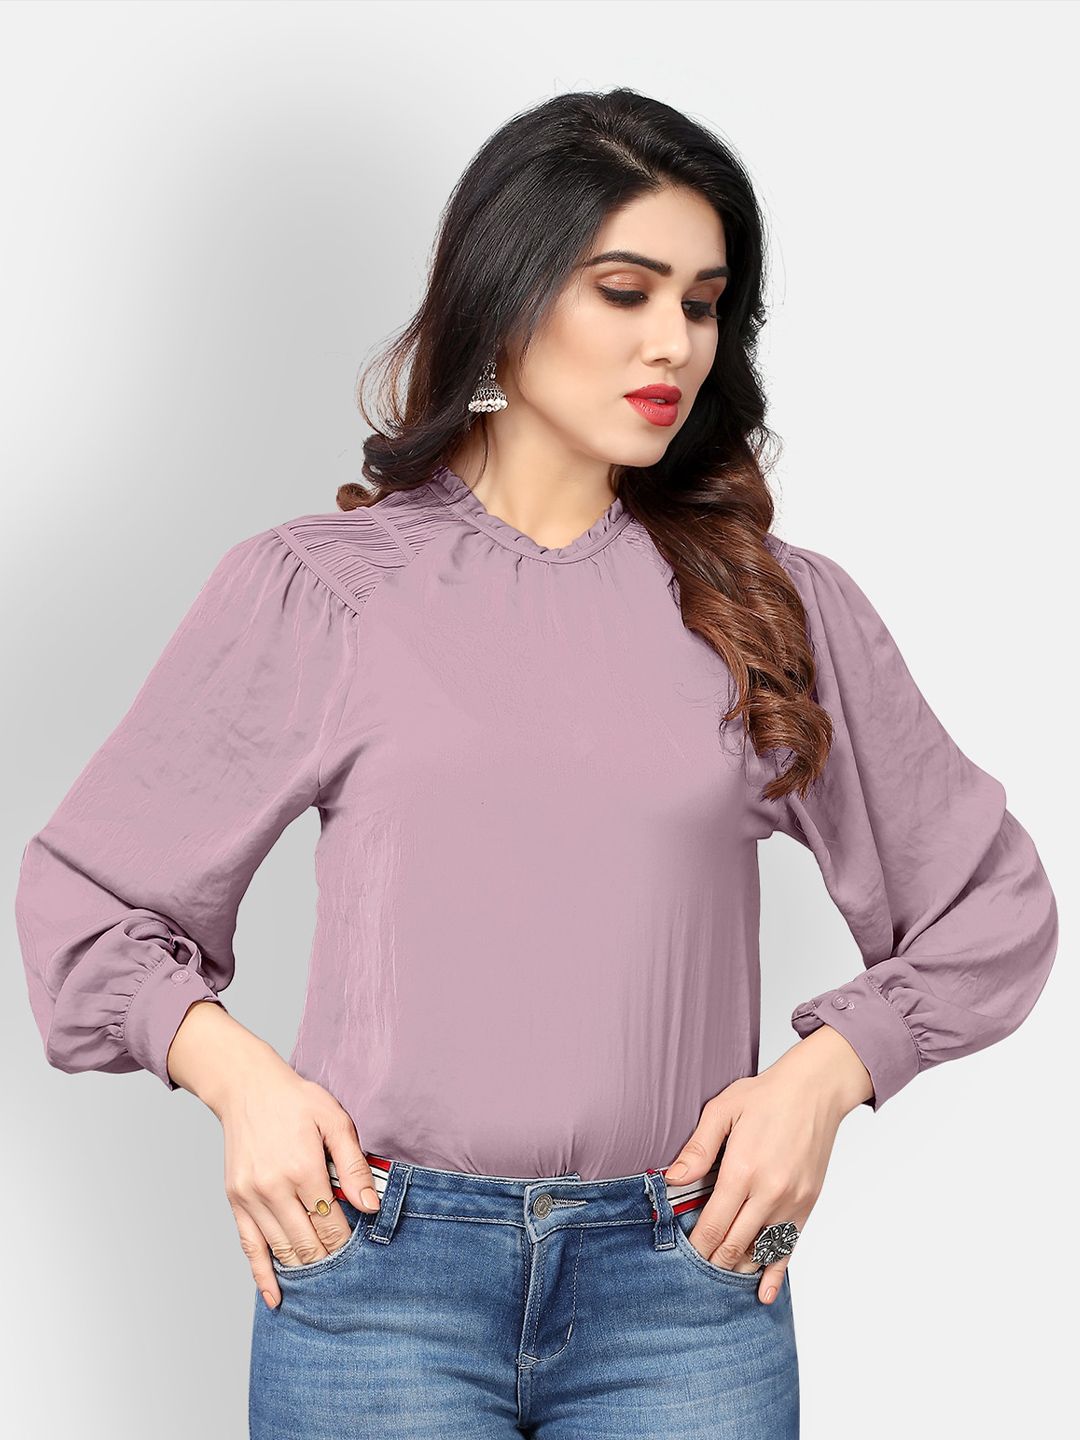 Mclothings High Neck Cuffed Sleeves Satin Blouson Top Price in India